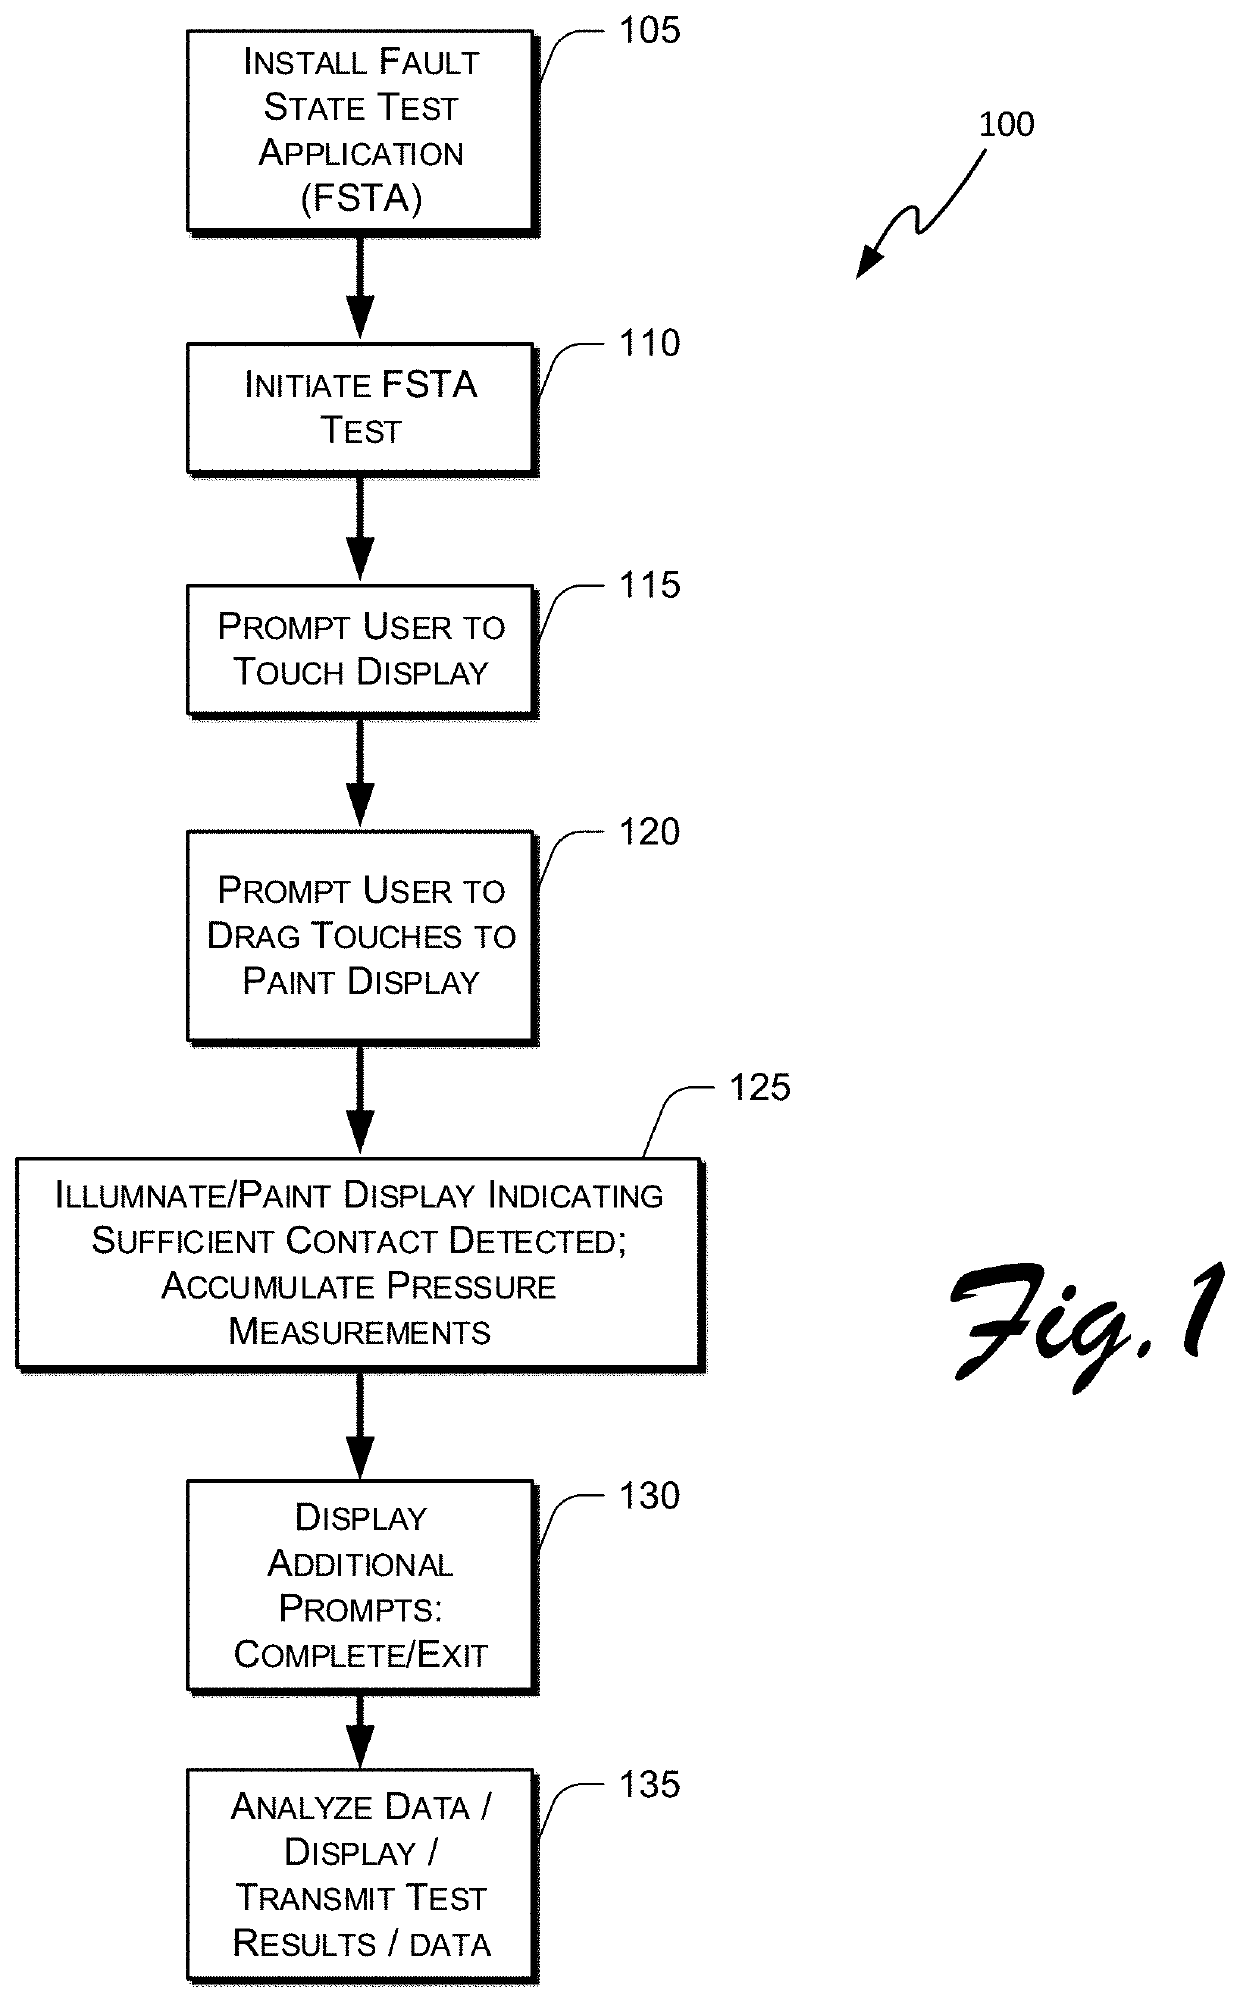 System and method for detection of mobile device fault conditions